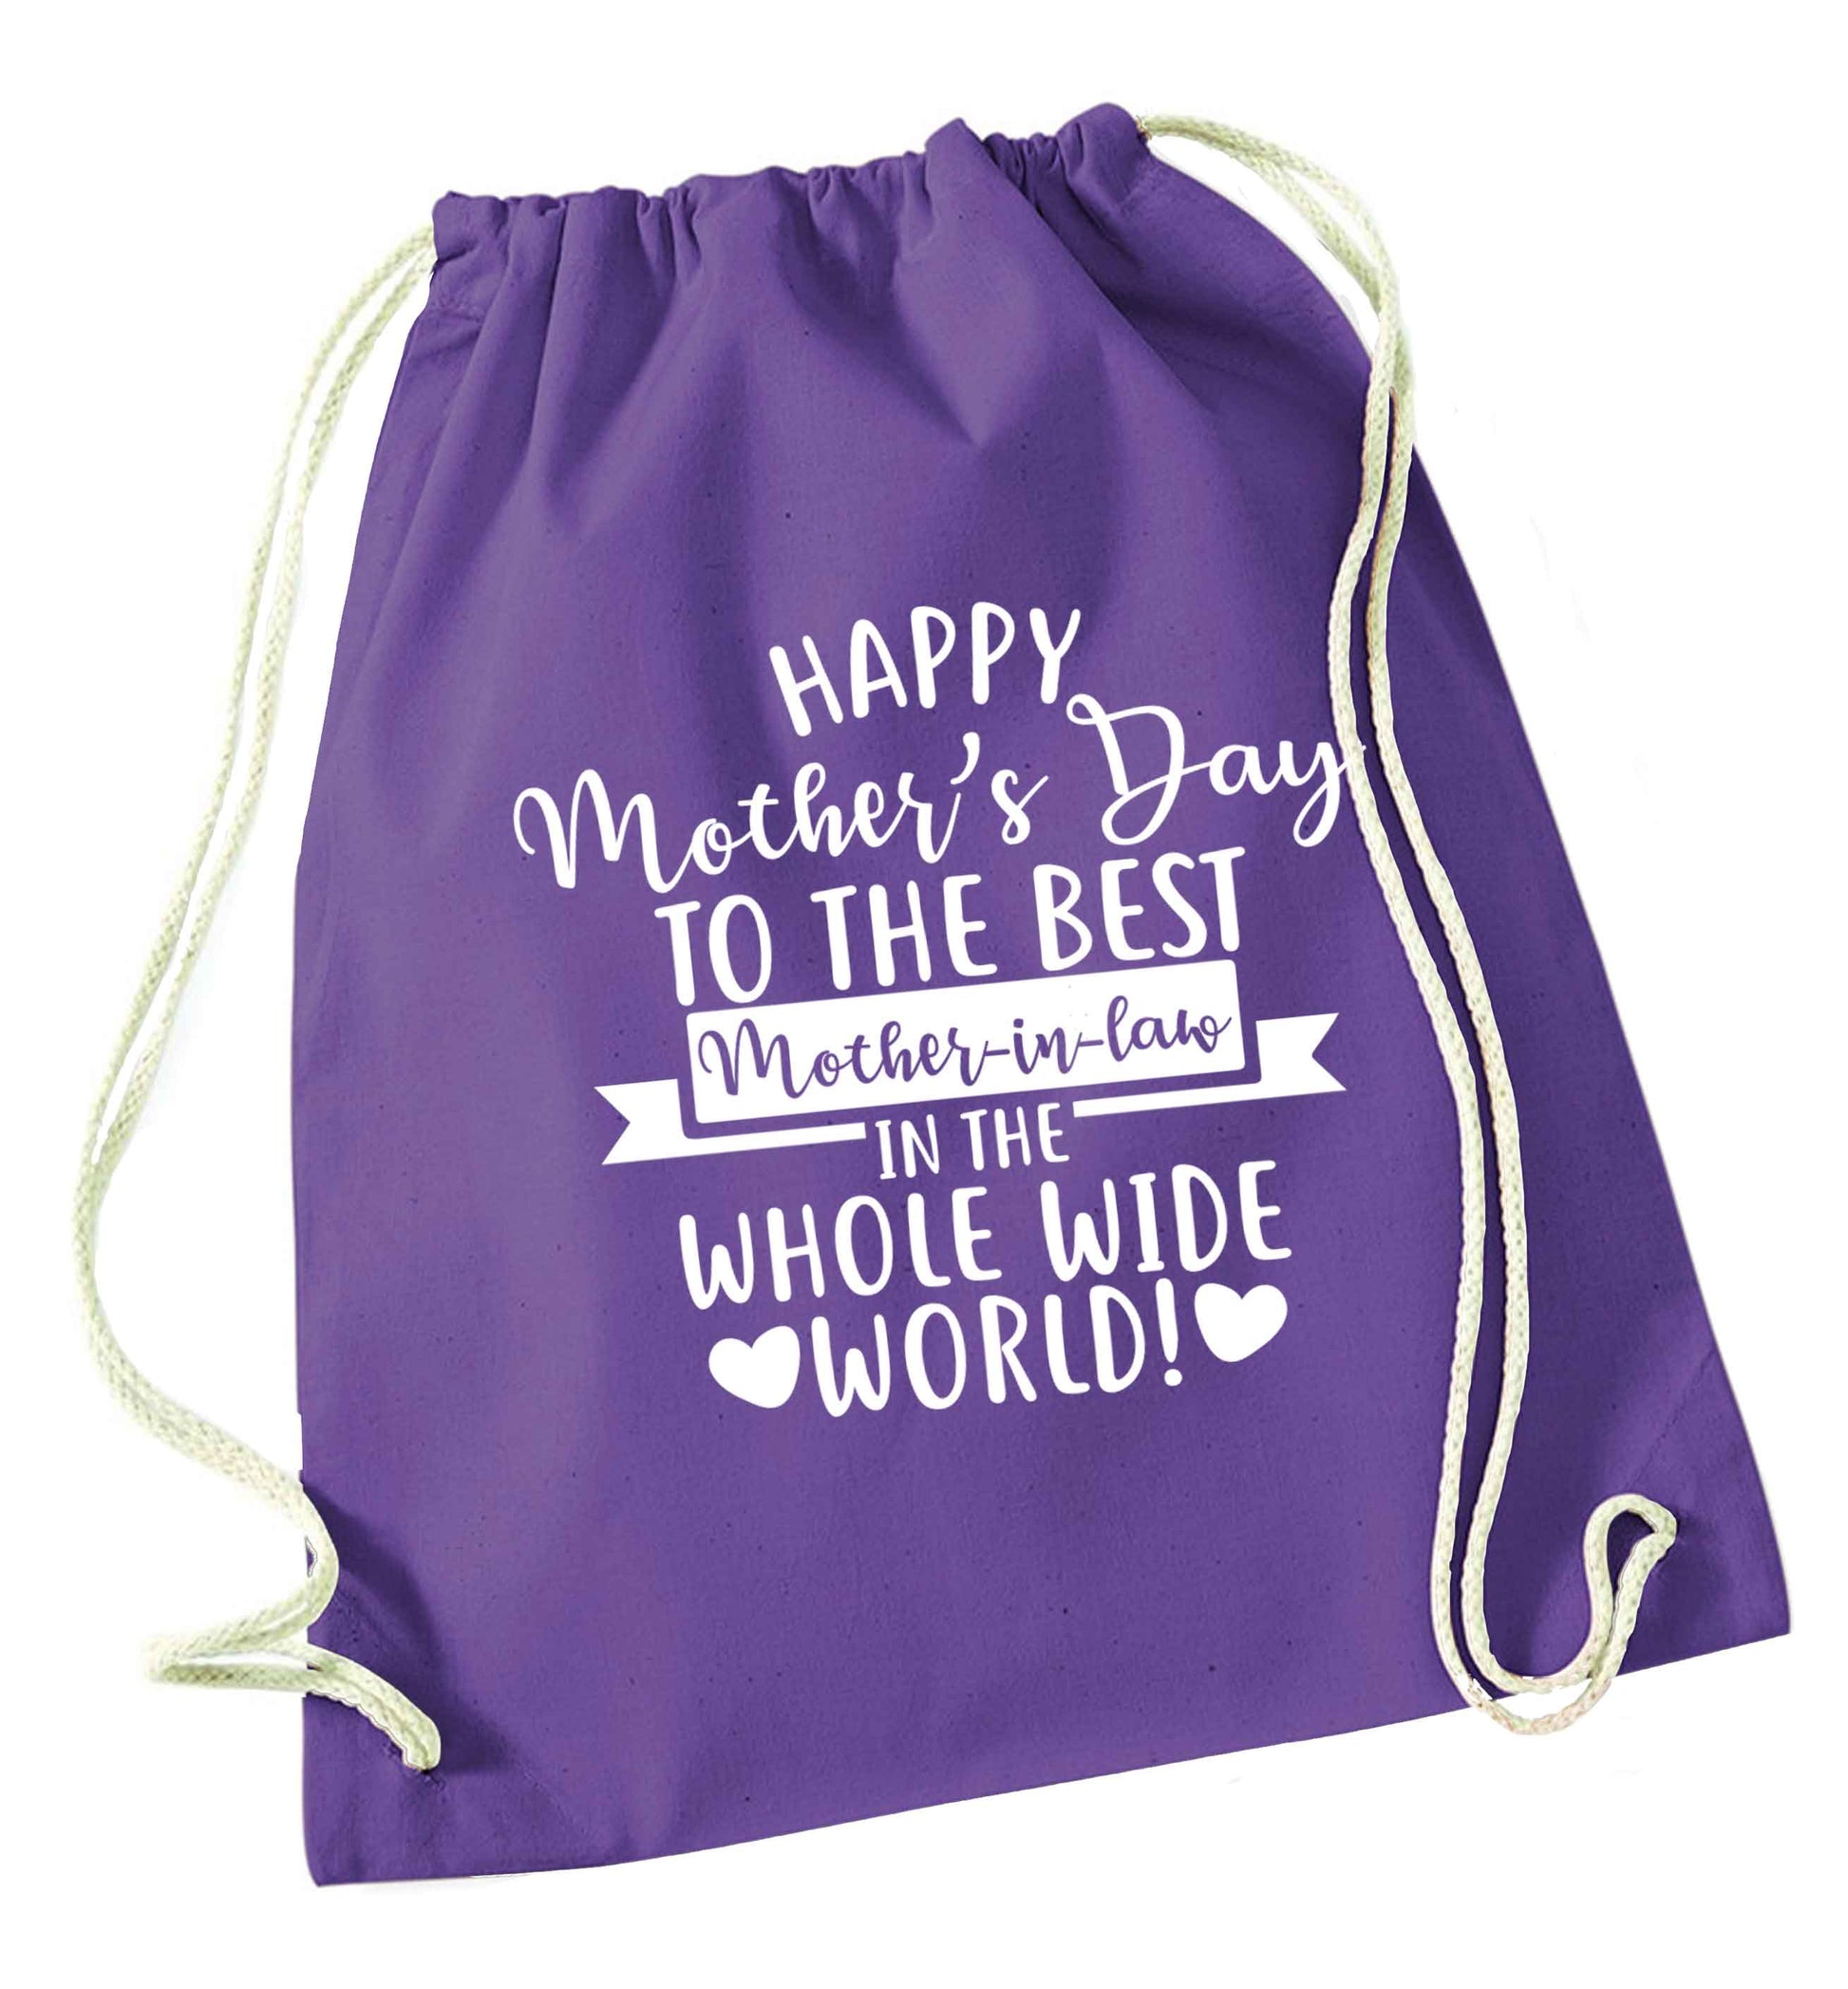 Happy mother's day to the best mother-in law in the world purple drawstring bag